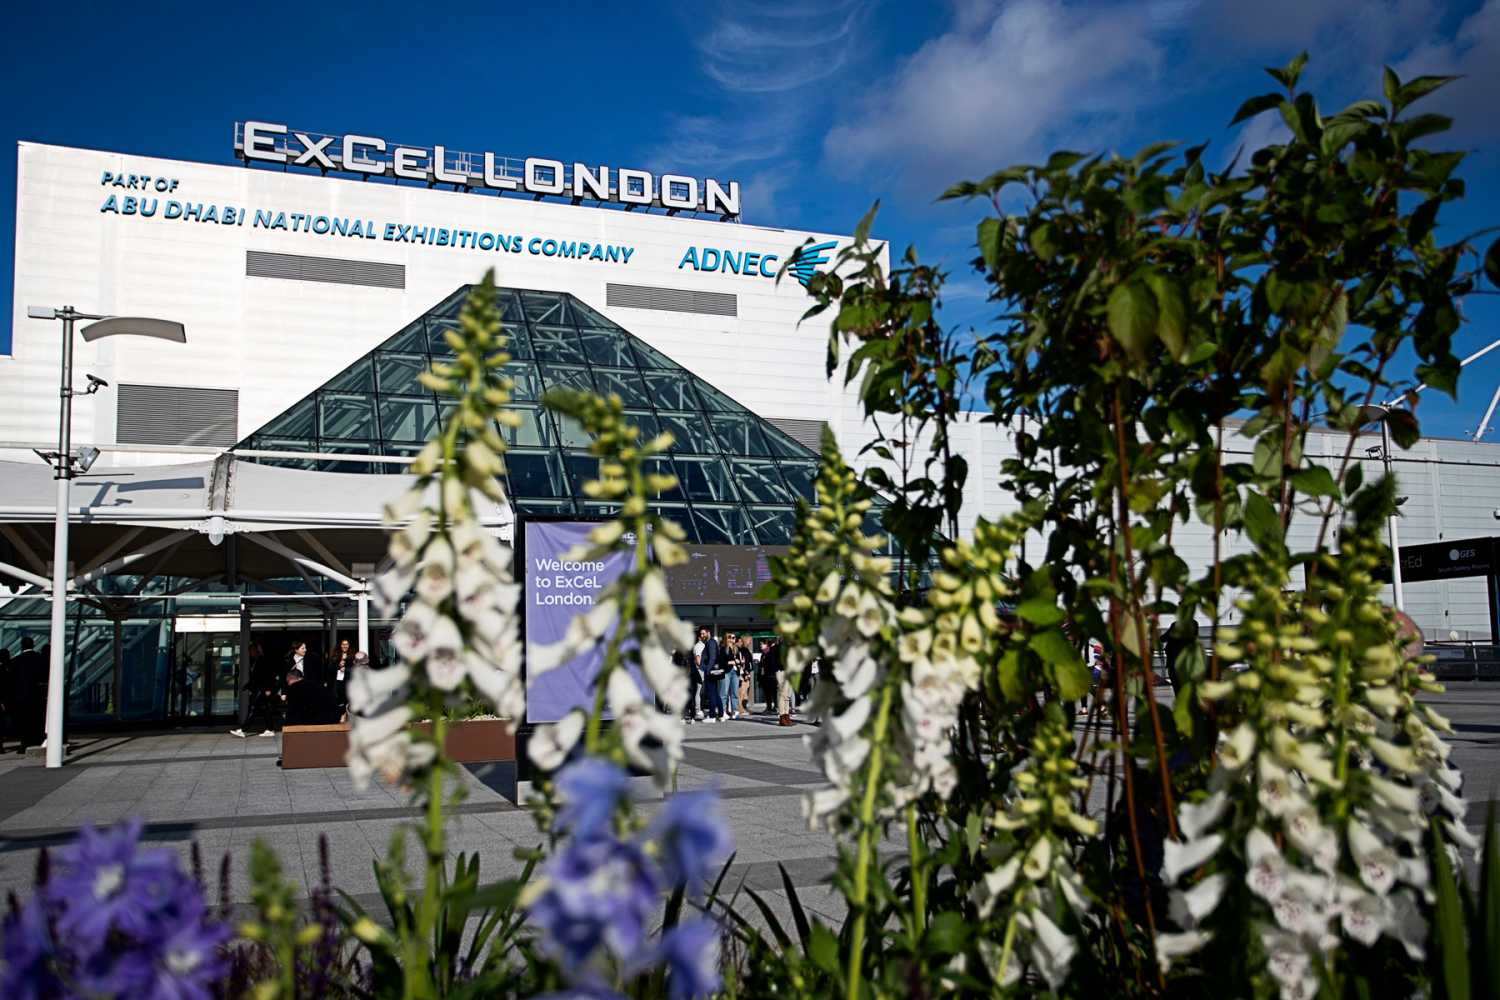 ExCel London continues to expand